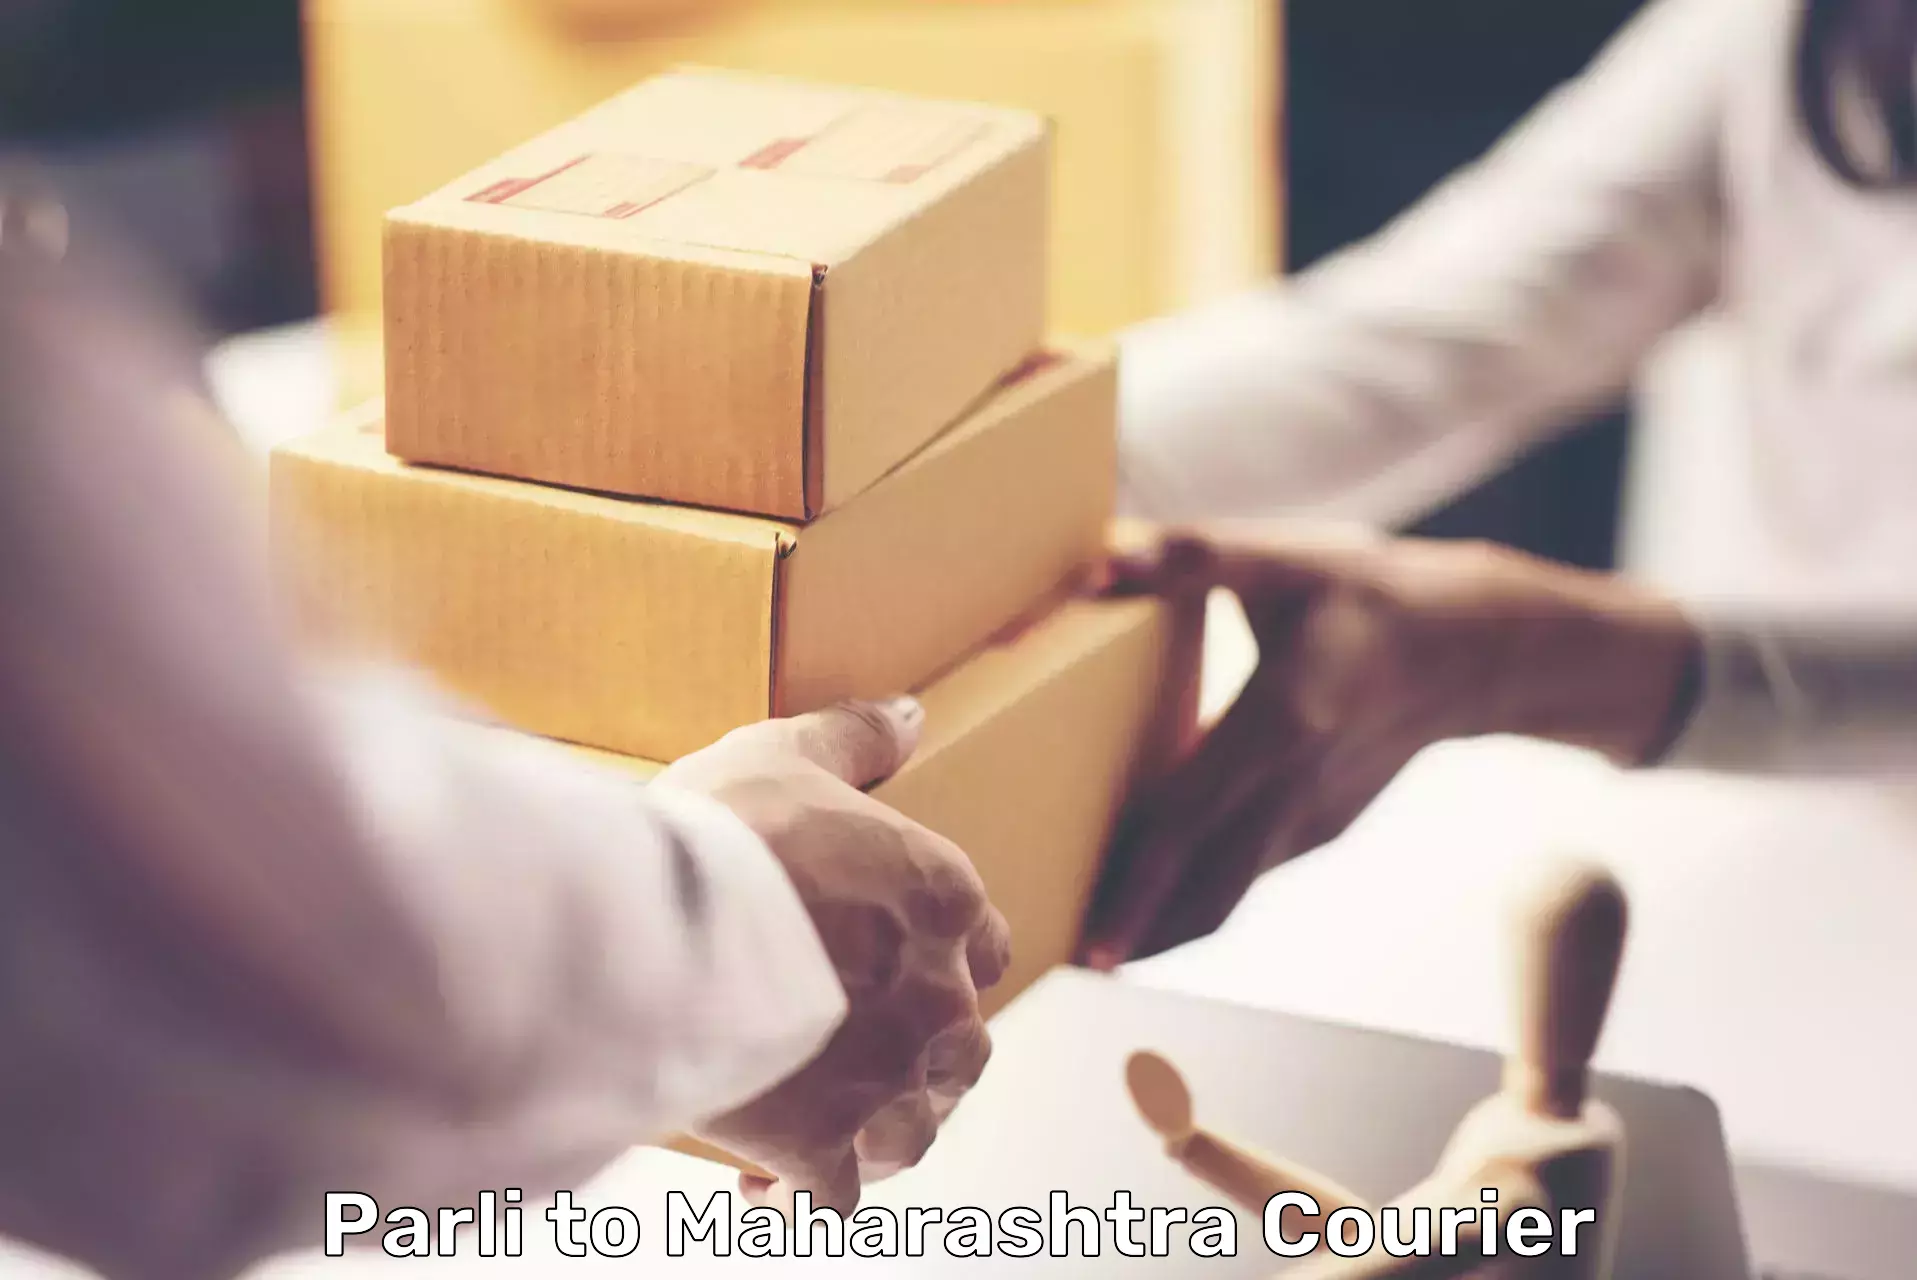 Multi-package shipping in Parli to Kannad